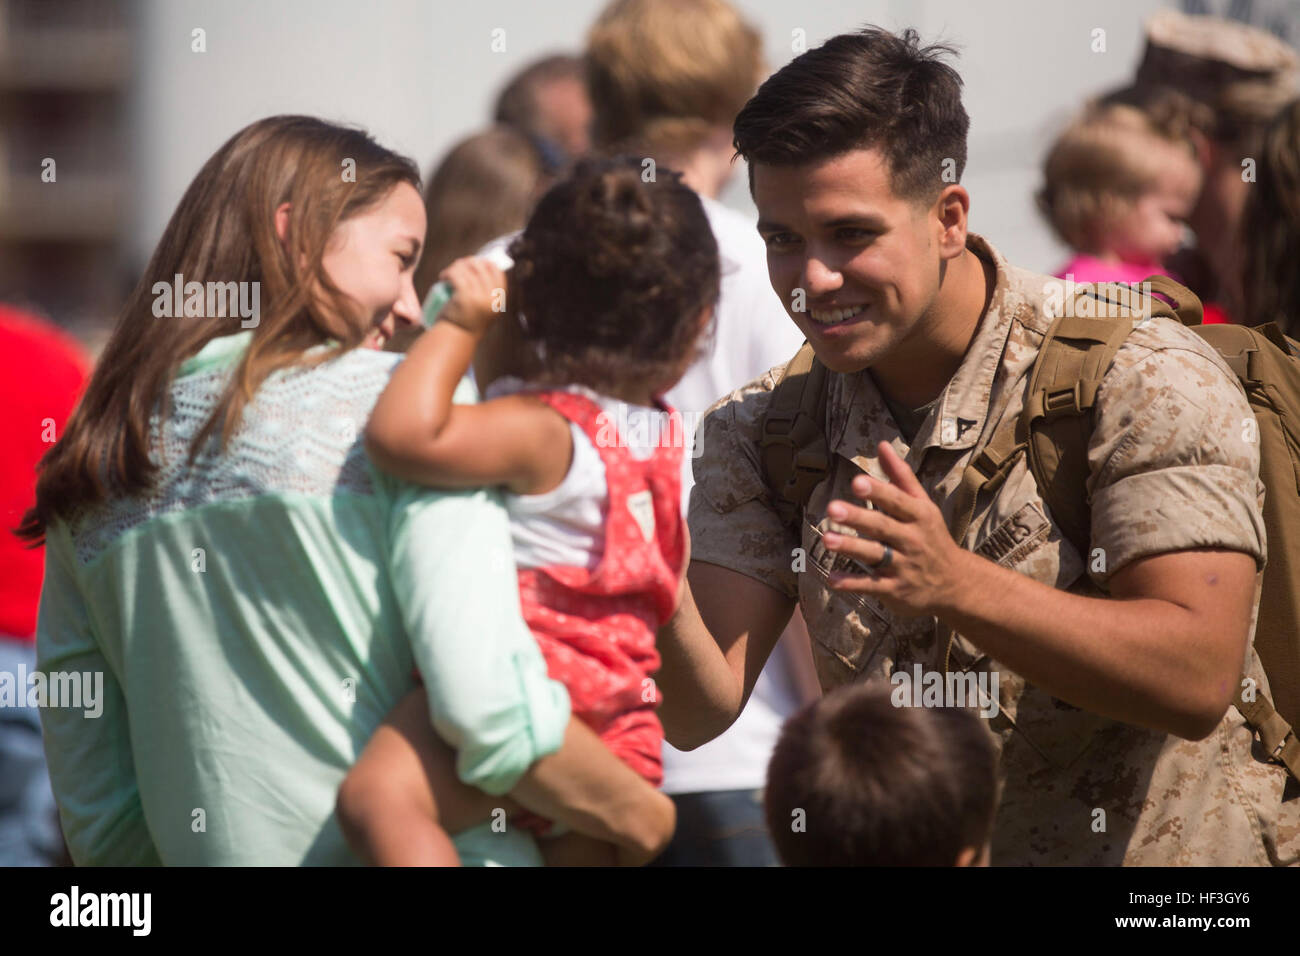 Lance Cpl. Austin Lewis, a combat photographer with the 24th Marine Expeditionary Unit, reunites with his daughter during the Command Element’s homecoming at Camp Lejeune, N.C., July 17, 2015. Marines and Sailors of the 24th MEU were embarked on the ships of the Iwo Jima Amphibious Ready Group and supported operations in the U.S. 5th and 6th Fleet area of operations. They also took part in numerous theater security cooperation exercises and training with allied partners such as Djibouti, Italy, Oman, Spain, France, Jordan, Israel, United Arab Emirates, Bahrain, Greece, Kuwait, and Saudi Arabia Stock Photo